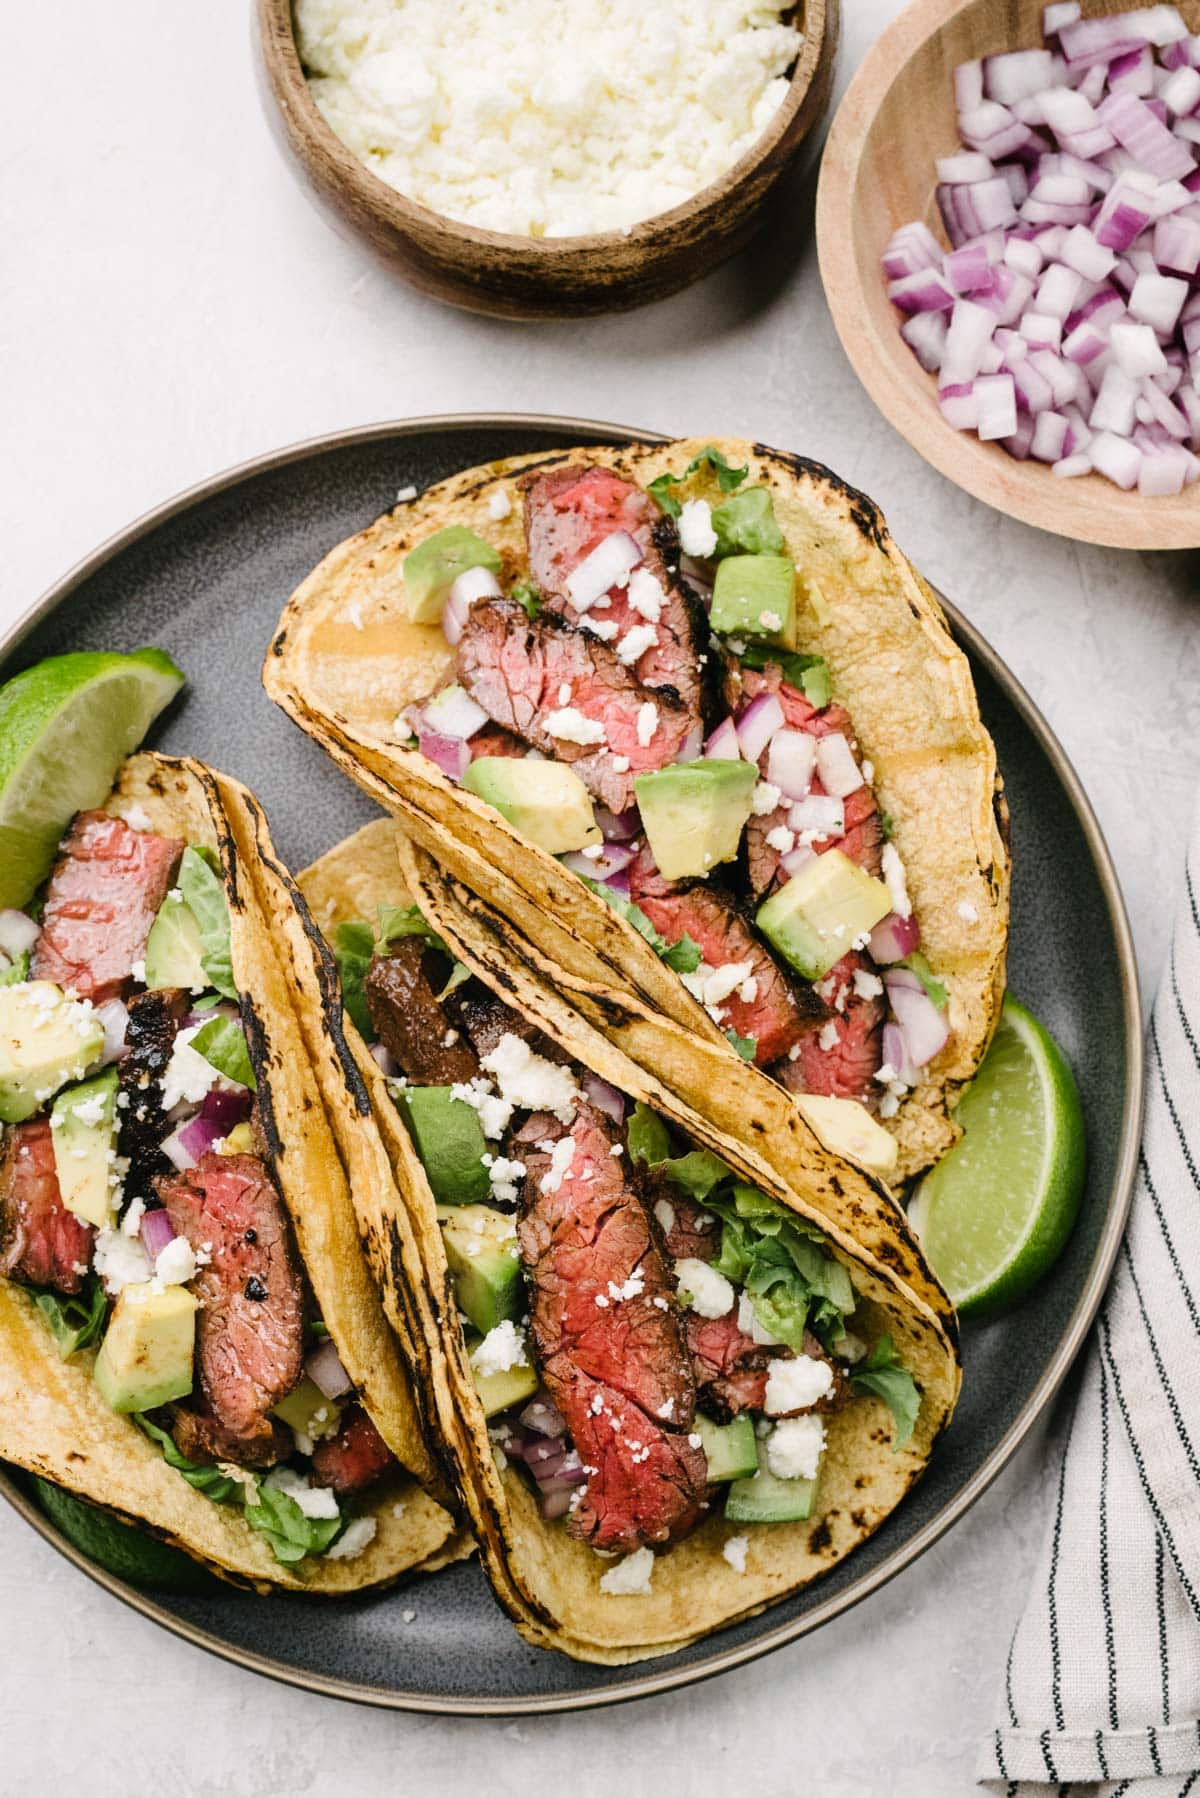 Three skirt steak tacos on a dark grey plate surrounded by a striped linen napkin and small bowls of queso fresco cheese and minced red onion.